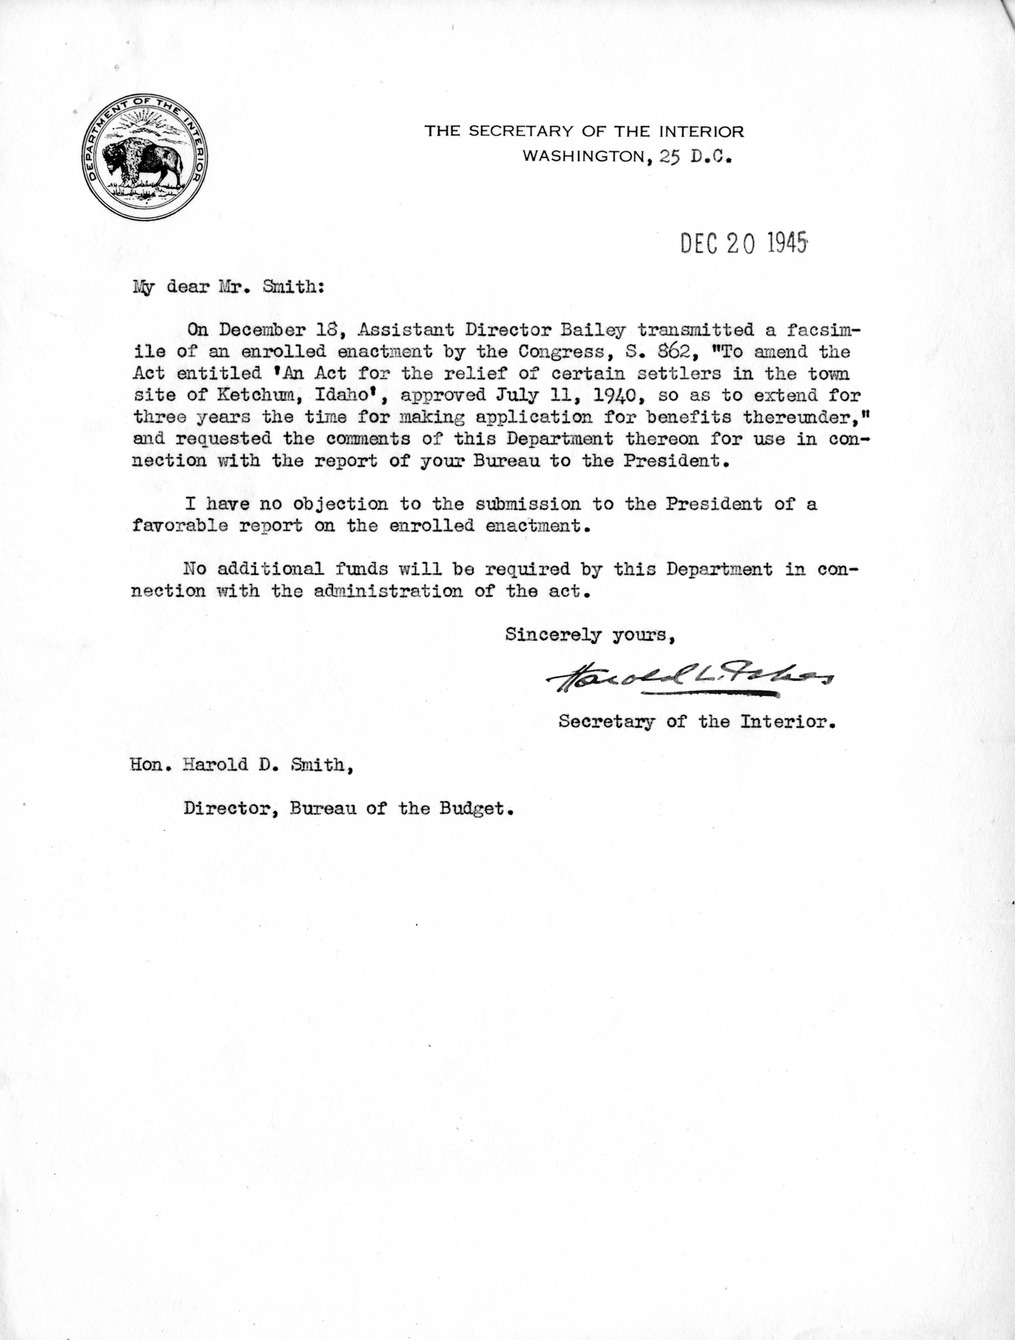 Memorandum from Frederick J. Bailey to M. C. Latta, S. 862, To Amend an Act for the Relief of Certain Settlers in the Town Site of Ketchum, Idaho, Approved July, 11, 1940, so as to Extend for Three Years the Time for Making Application for Benefits Thereunder, with Attachments